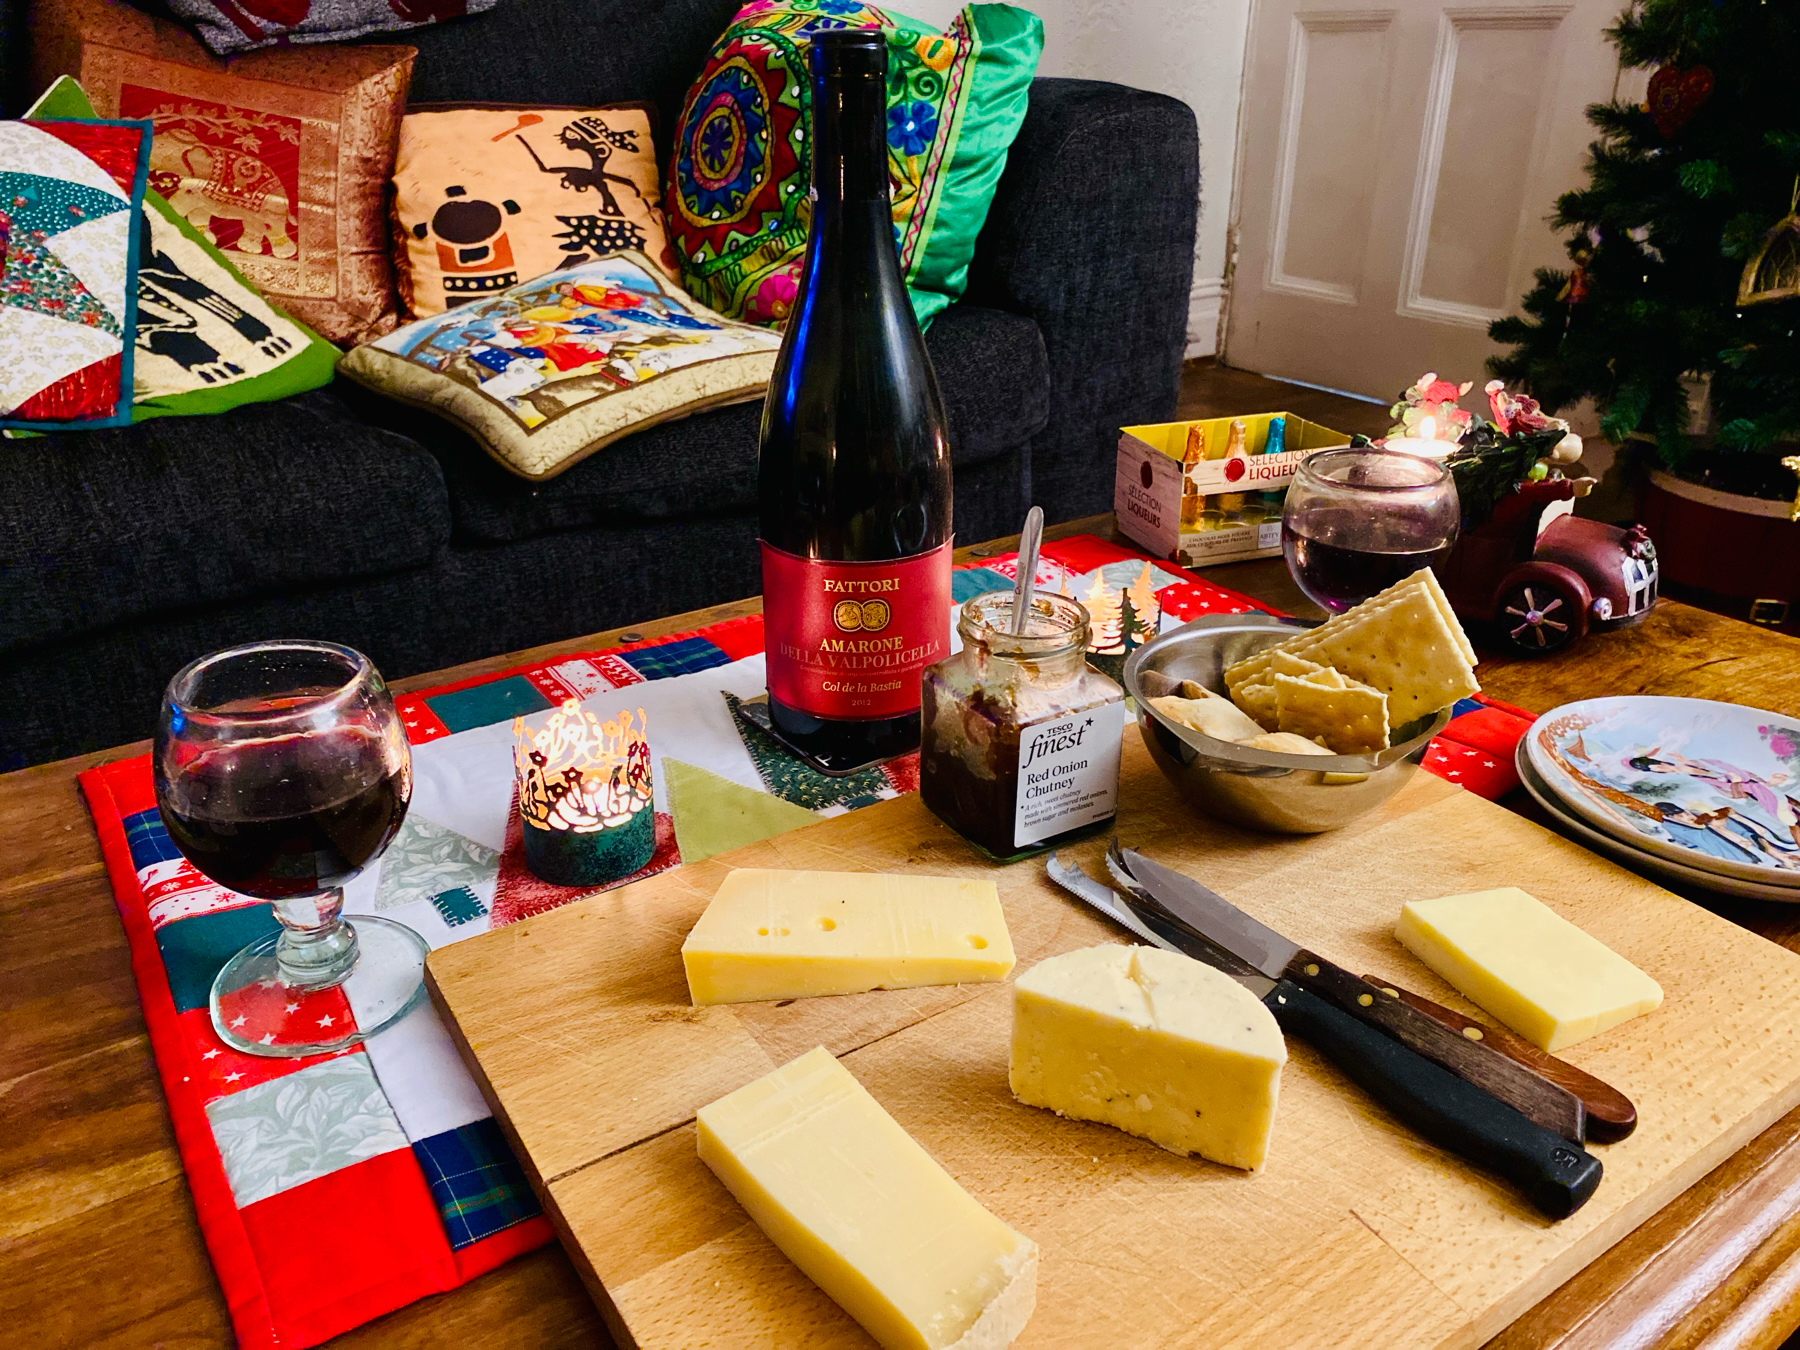 A cozy indoor scene with a festive atmosphere featuring a wine bottle, two glasses of red wine, assorted cheeses on a wooden board, crackers in a bowl, and a jar of red onion chutney. Decorative pillows, a Christmas tree.